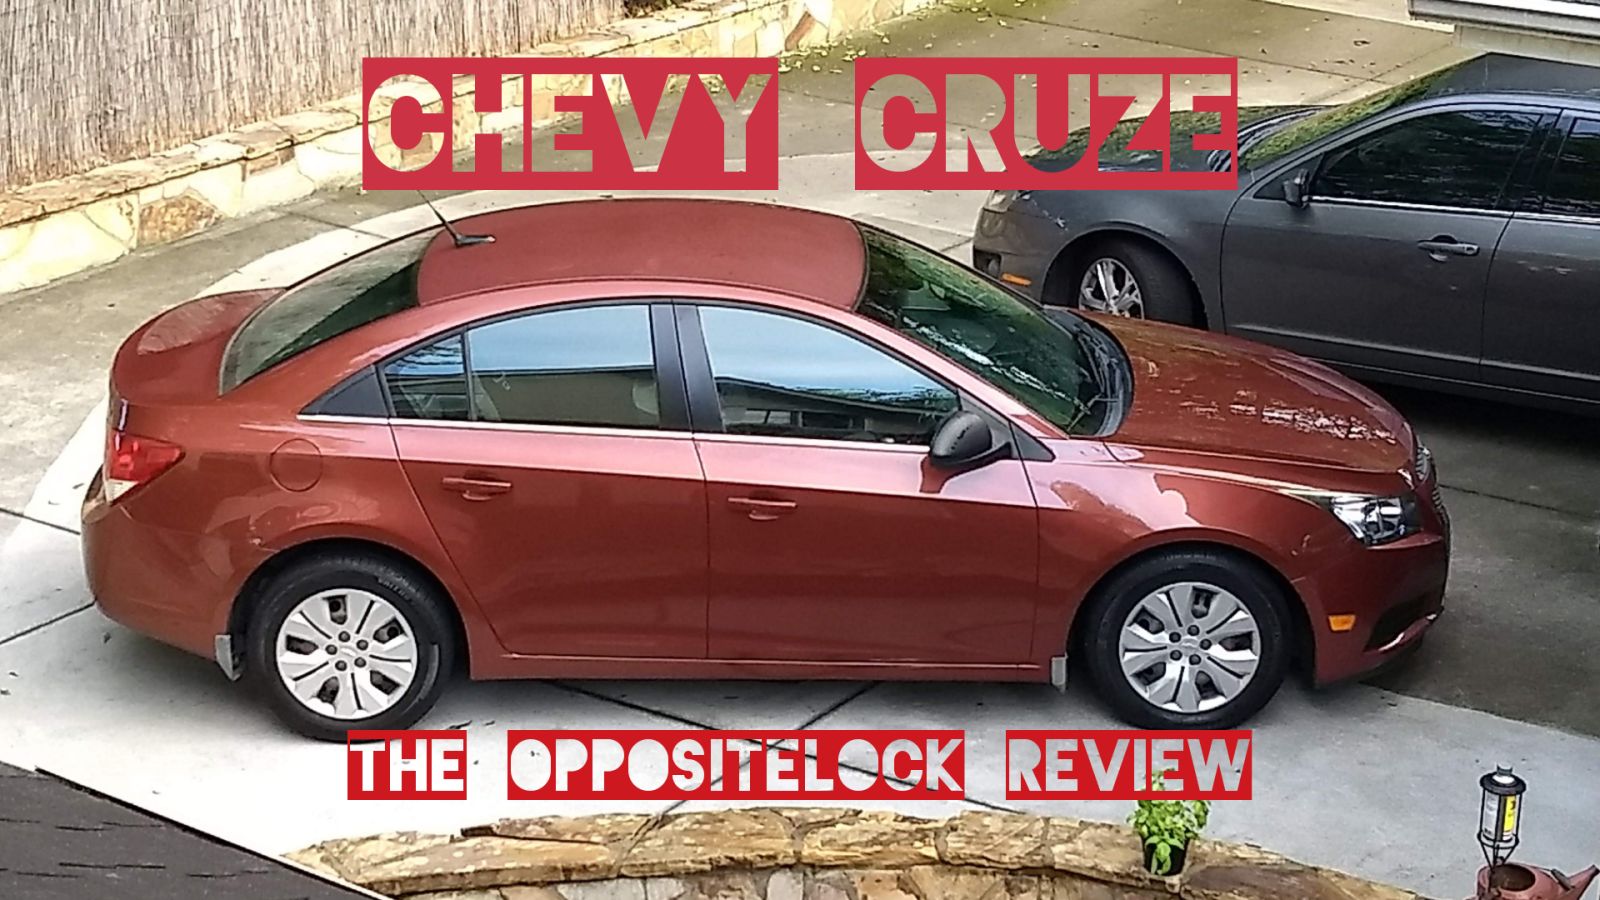 Illustration for article titled 2012 Chevy Cruze: Two Year Review and First Car Thoughts